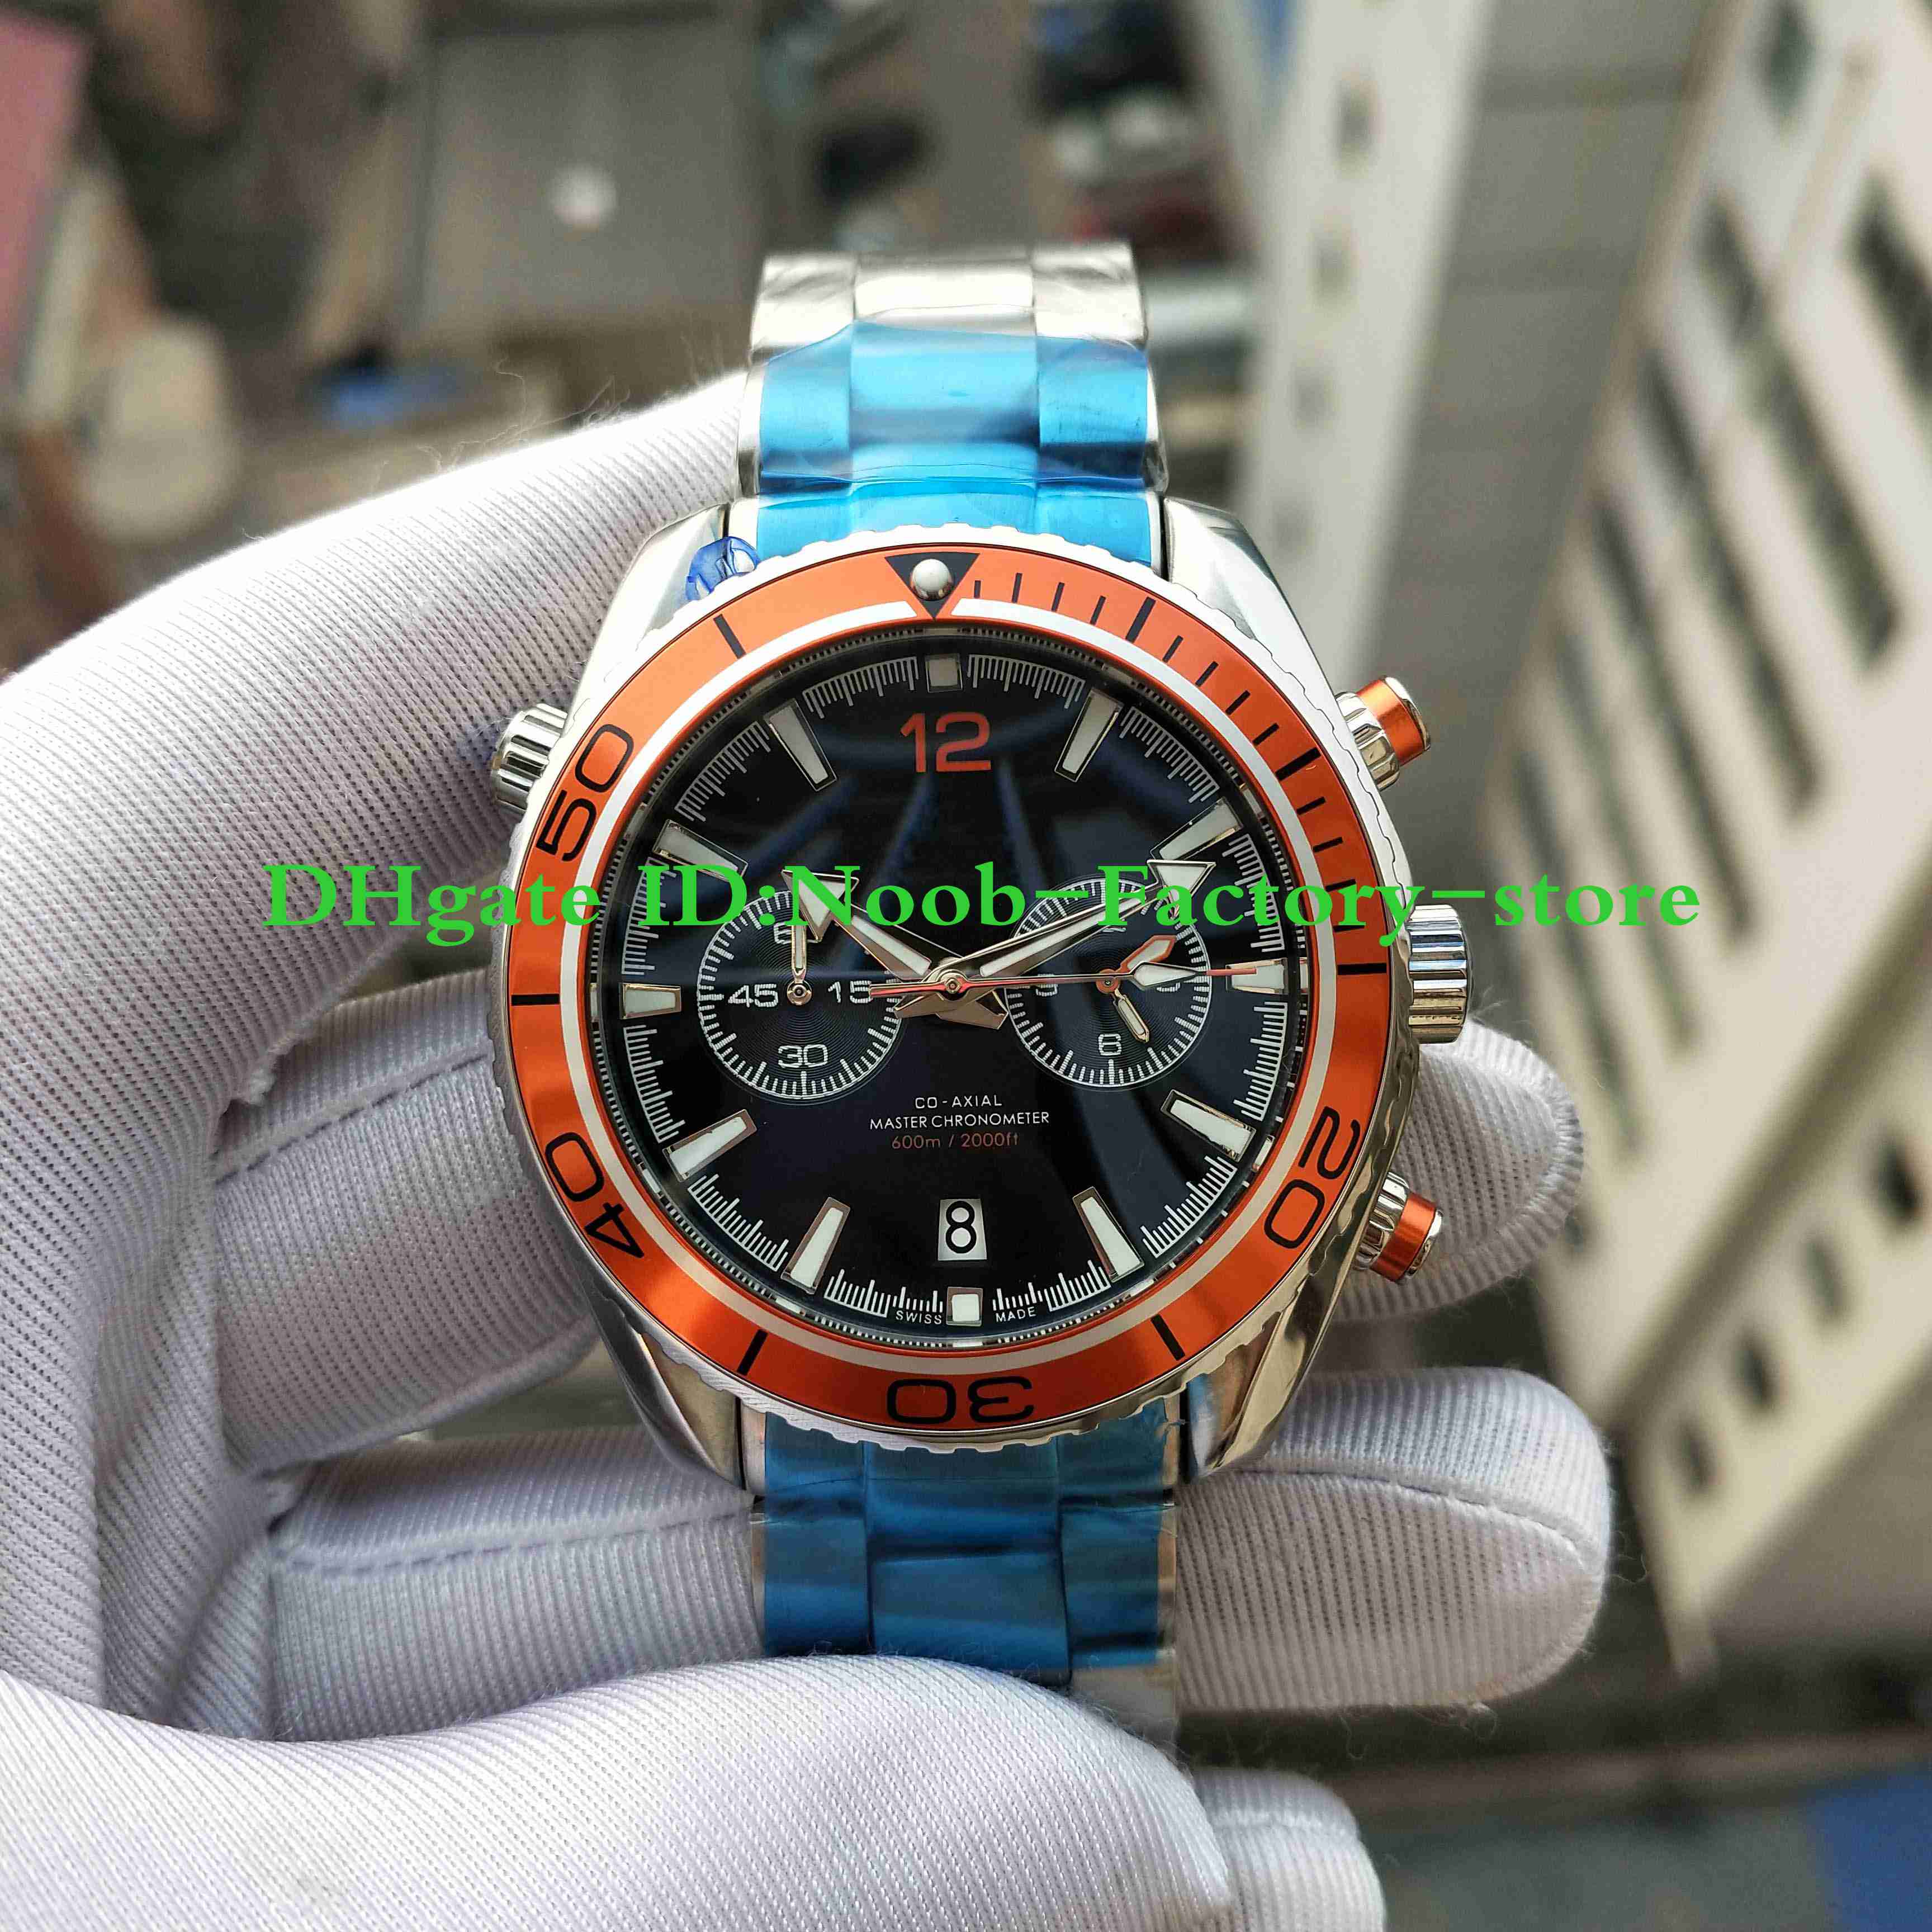 

Factory Photographs 600M Watch Co-Axial Planet Ocean 232.30.46.51.01.002 VK Quartz Chronograph Working Steel Wristwatches Mens Watches